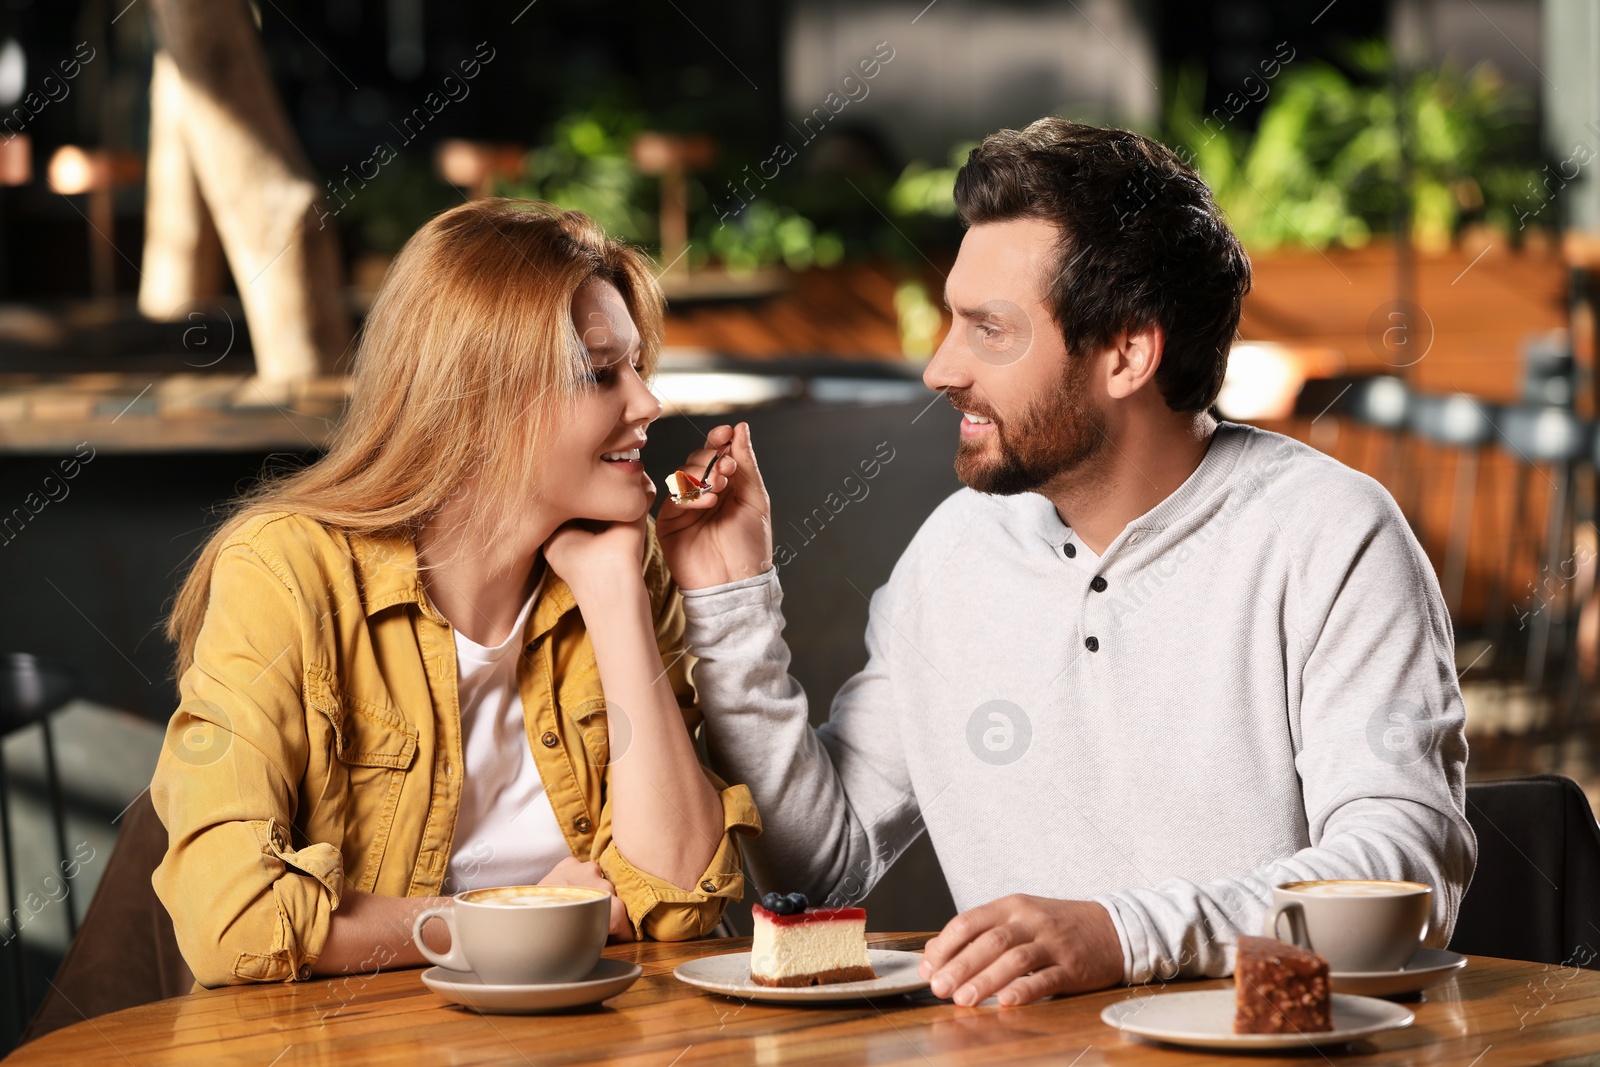 Photo of Romantic date. Handsome man feeding his girlfriend with cake in cafe